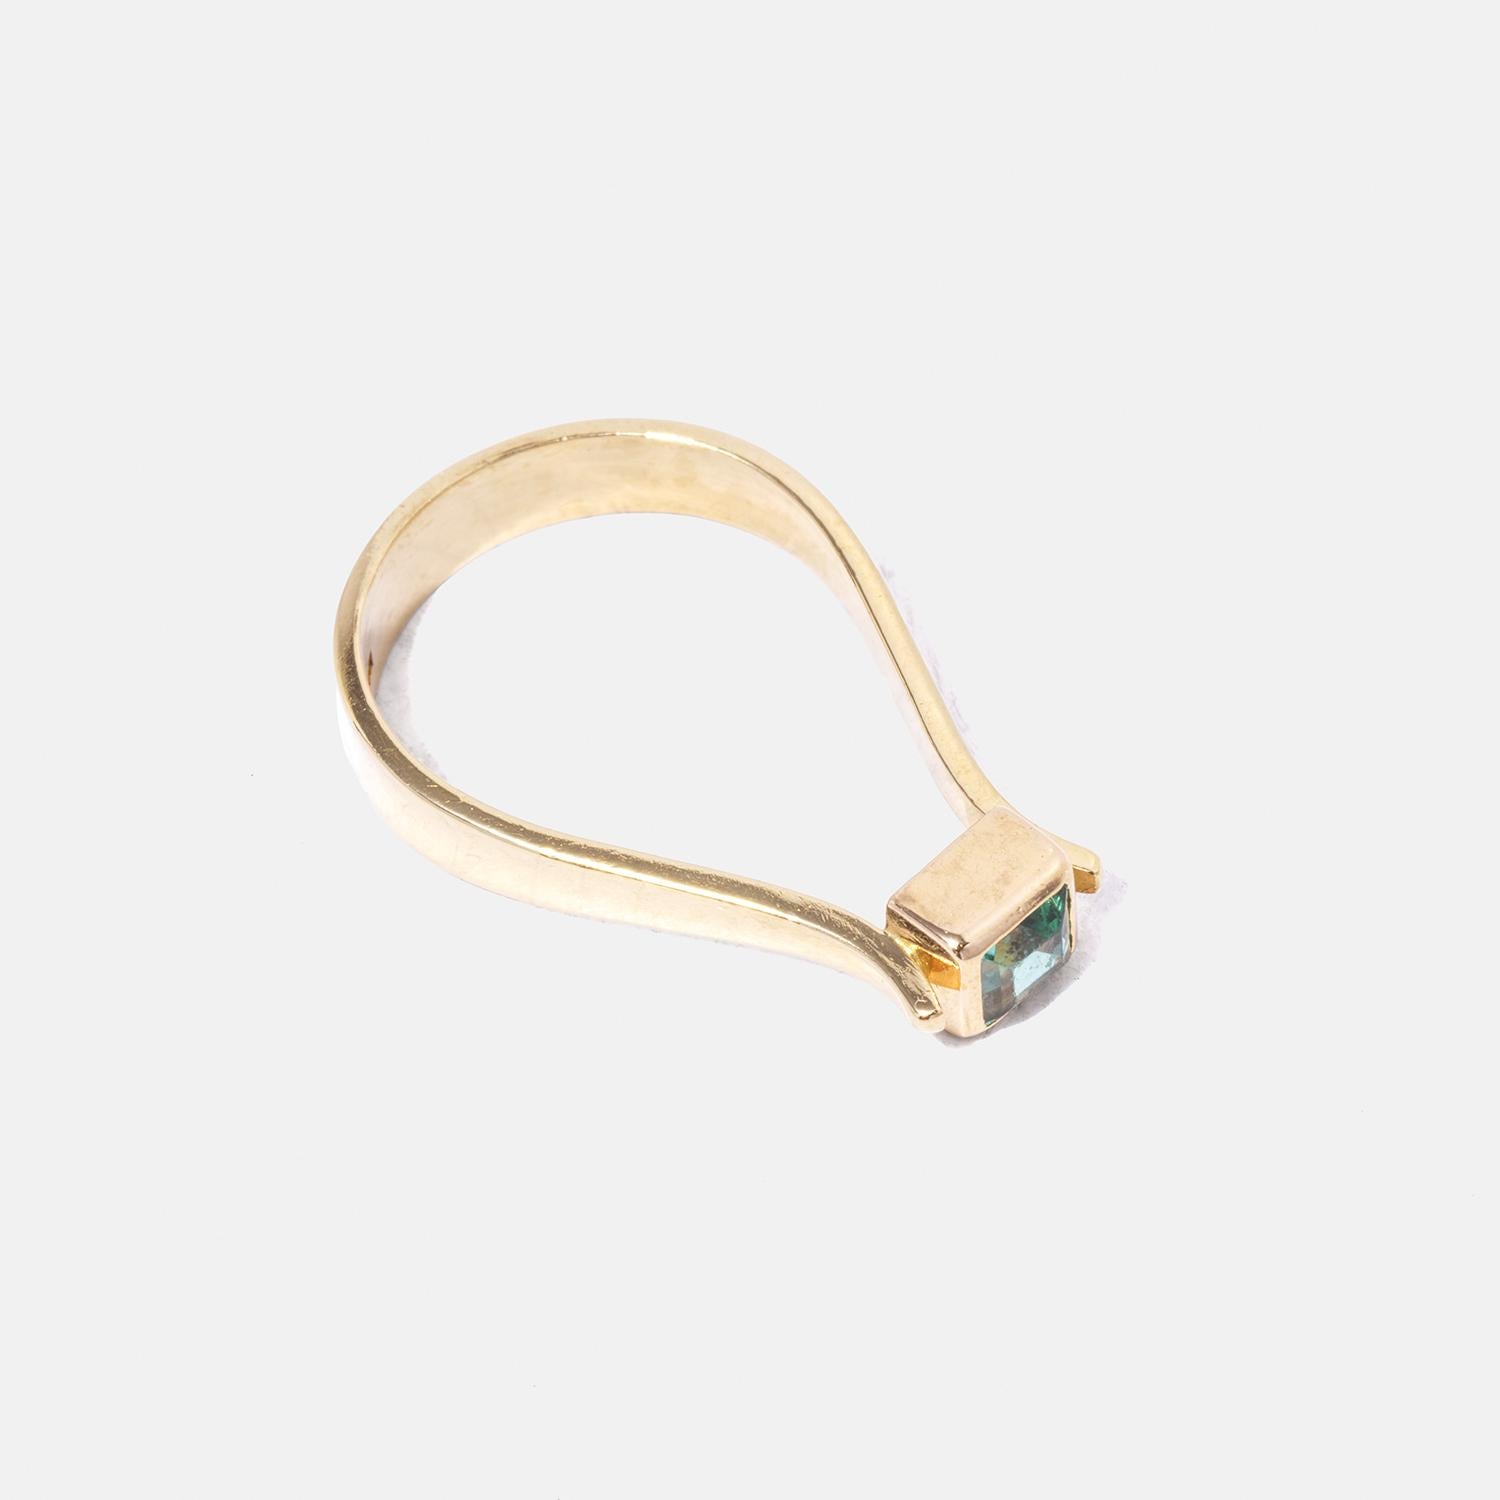 Square Cut Vintage 18k Gold and Tourmaline Ring by Rey Urban Made Year 1967 For Sale